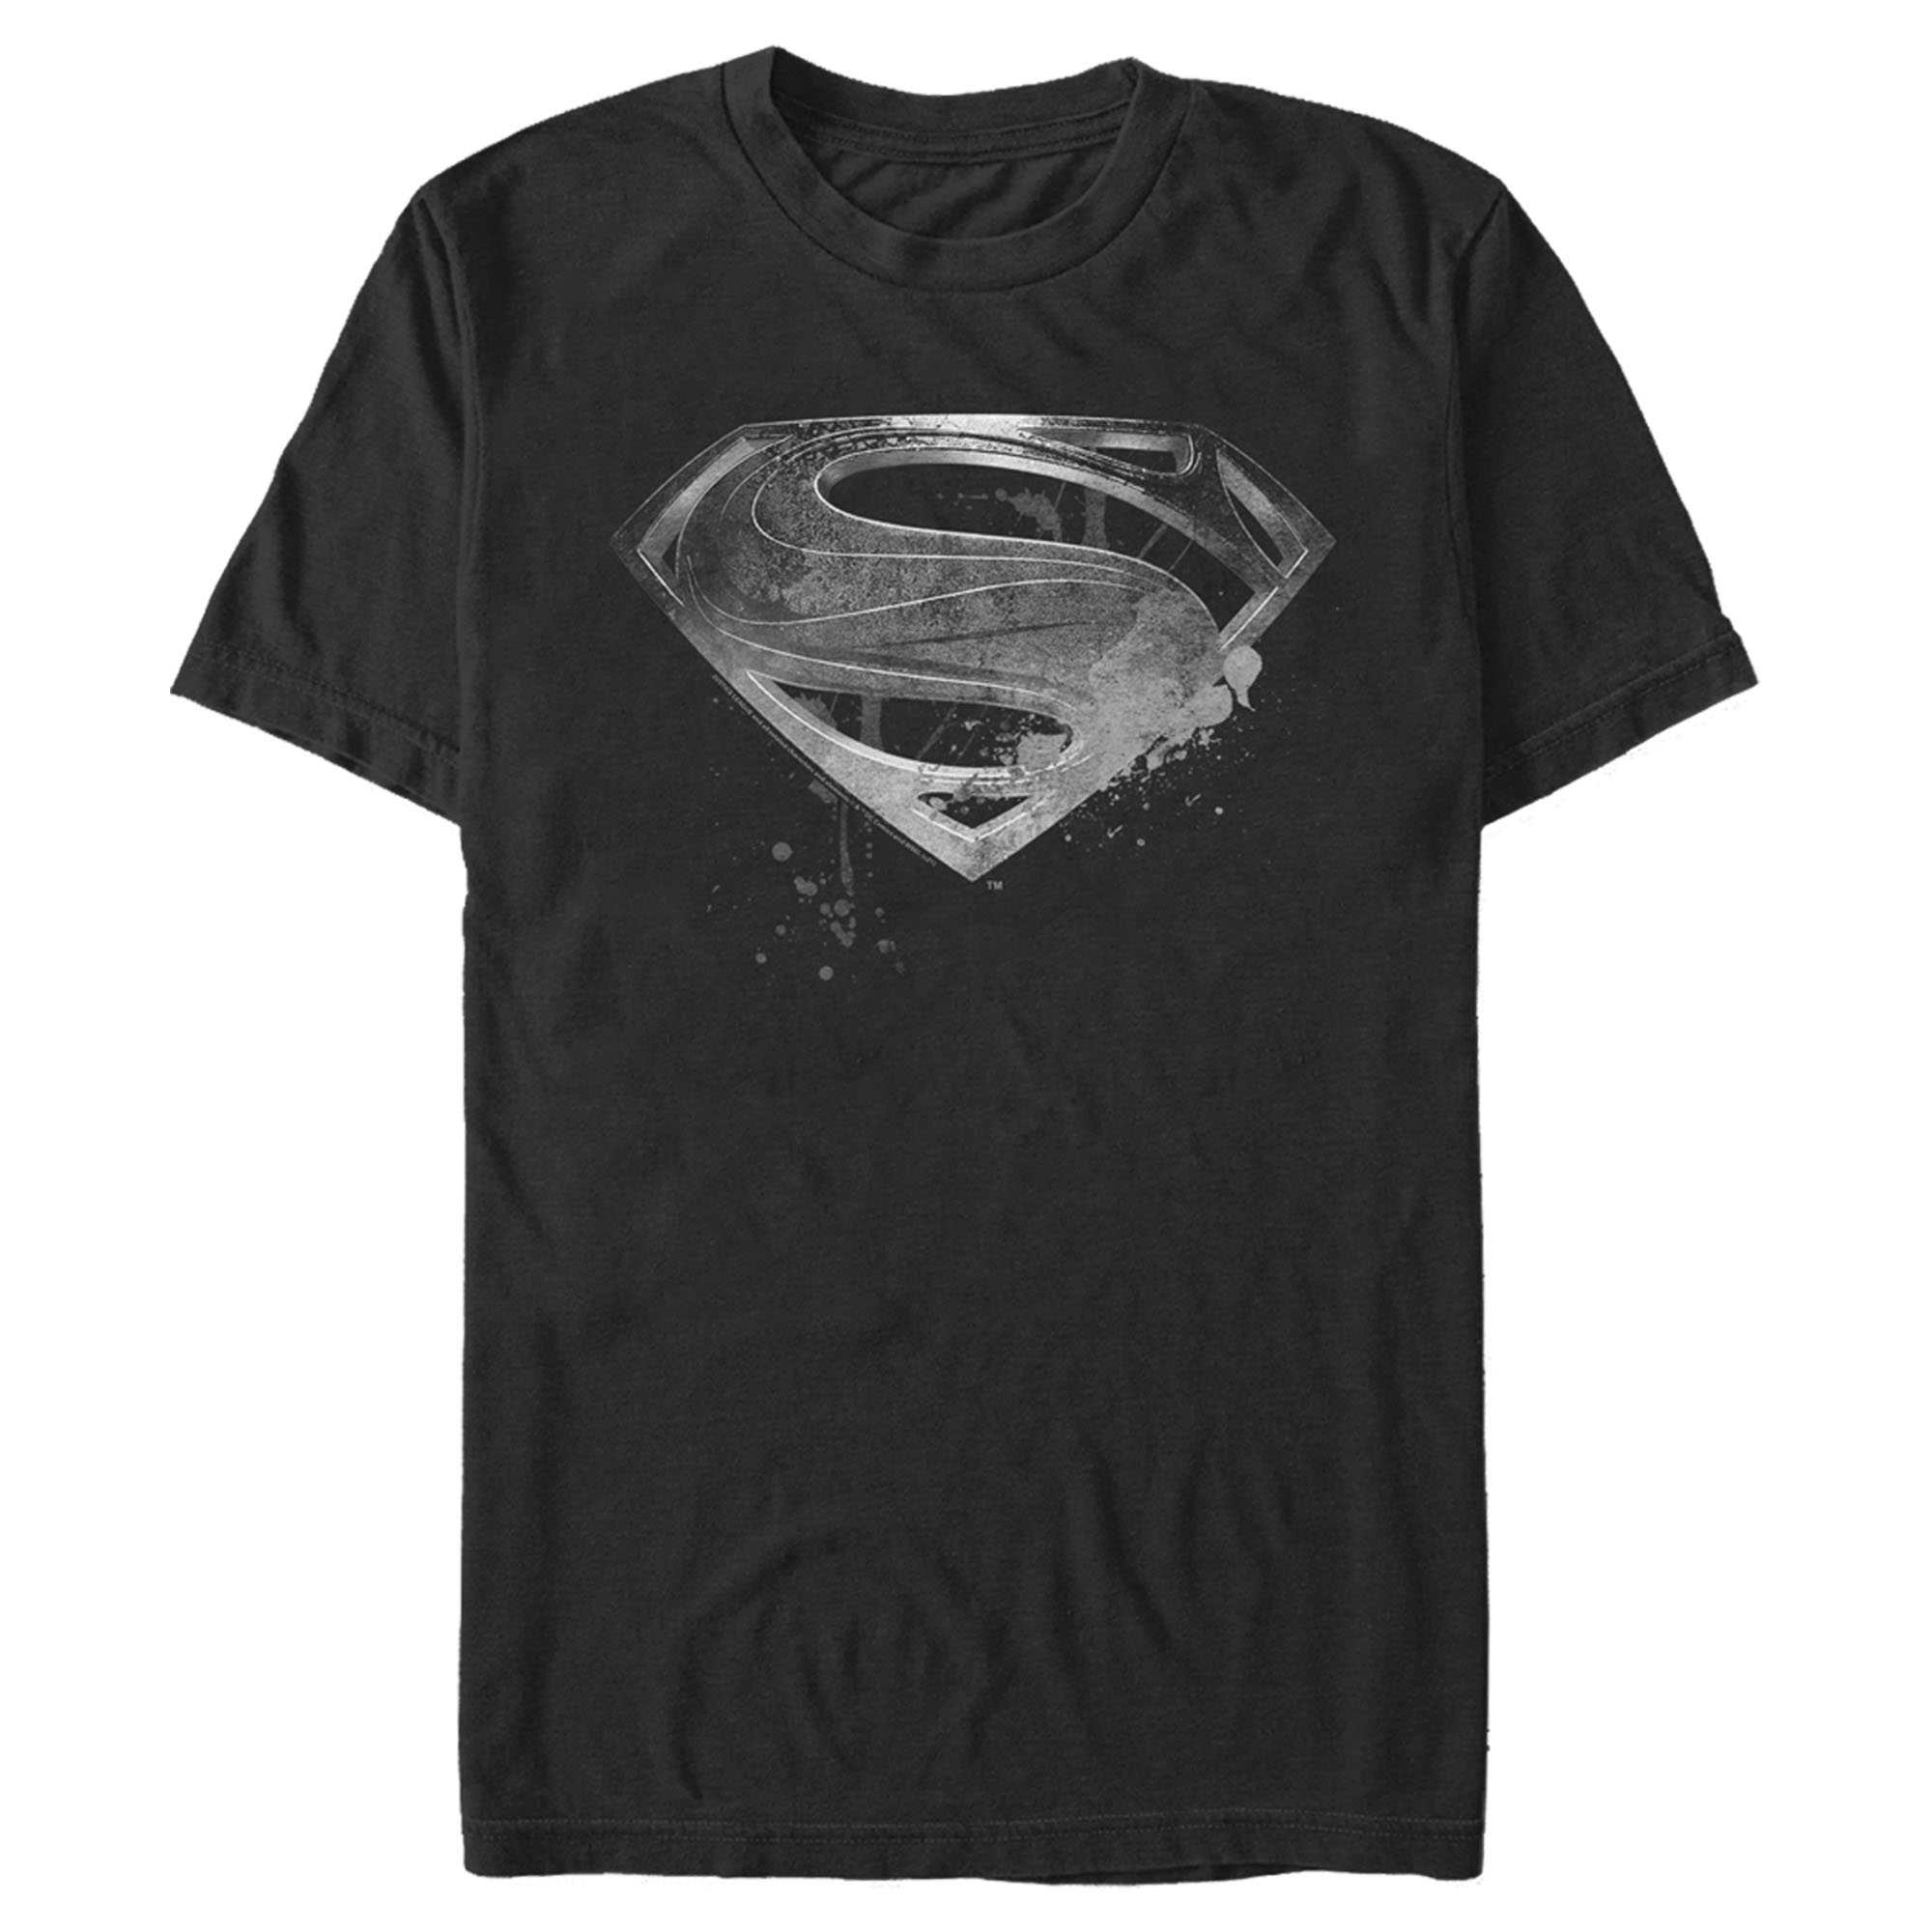 Men's Zack Snyder Justice League Superman Silver Logo  Graphic Tee Black Small - image 1 of 5